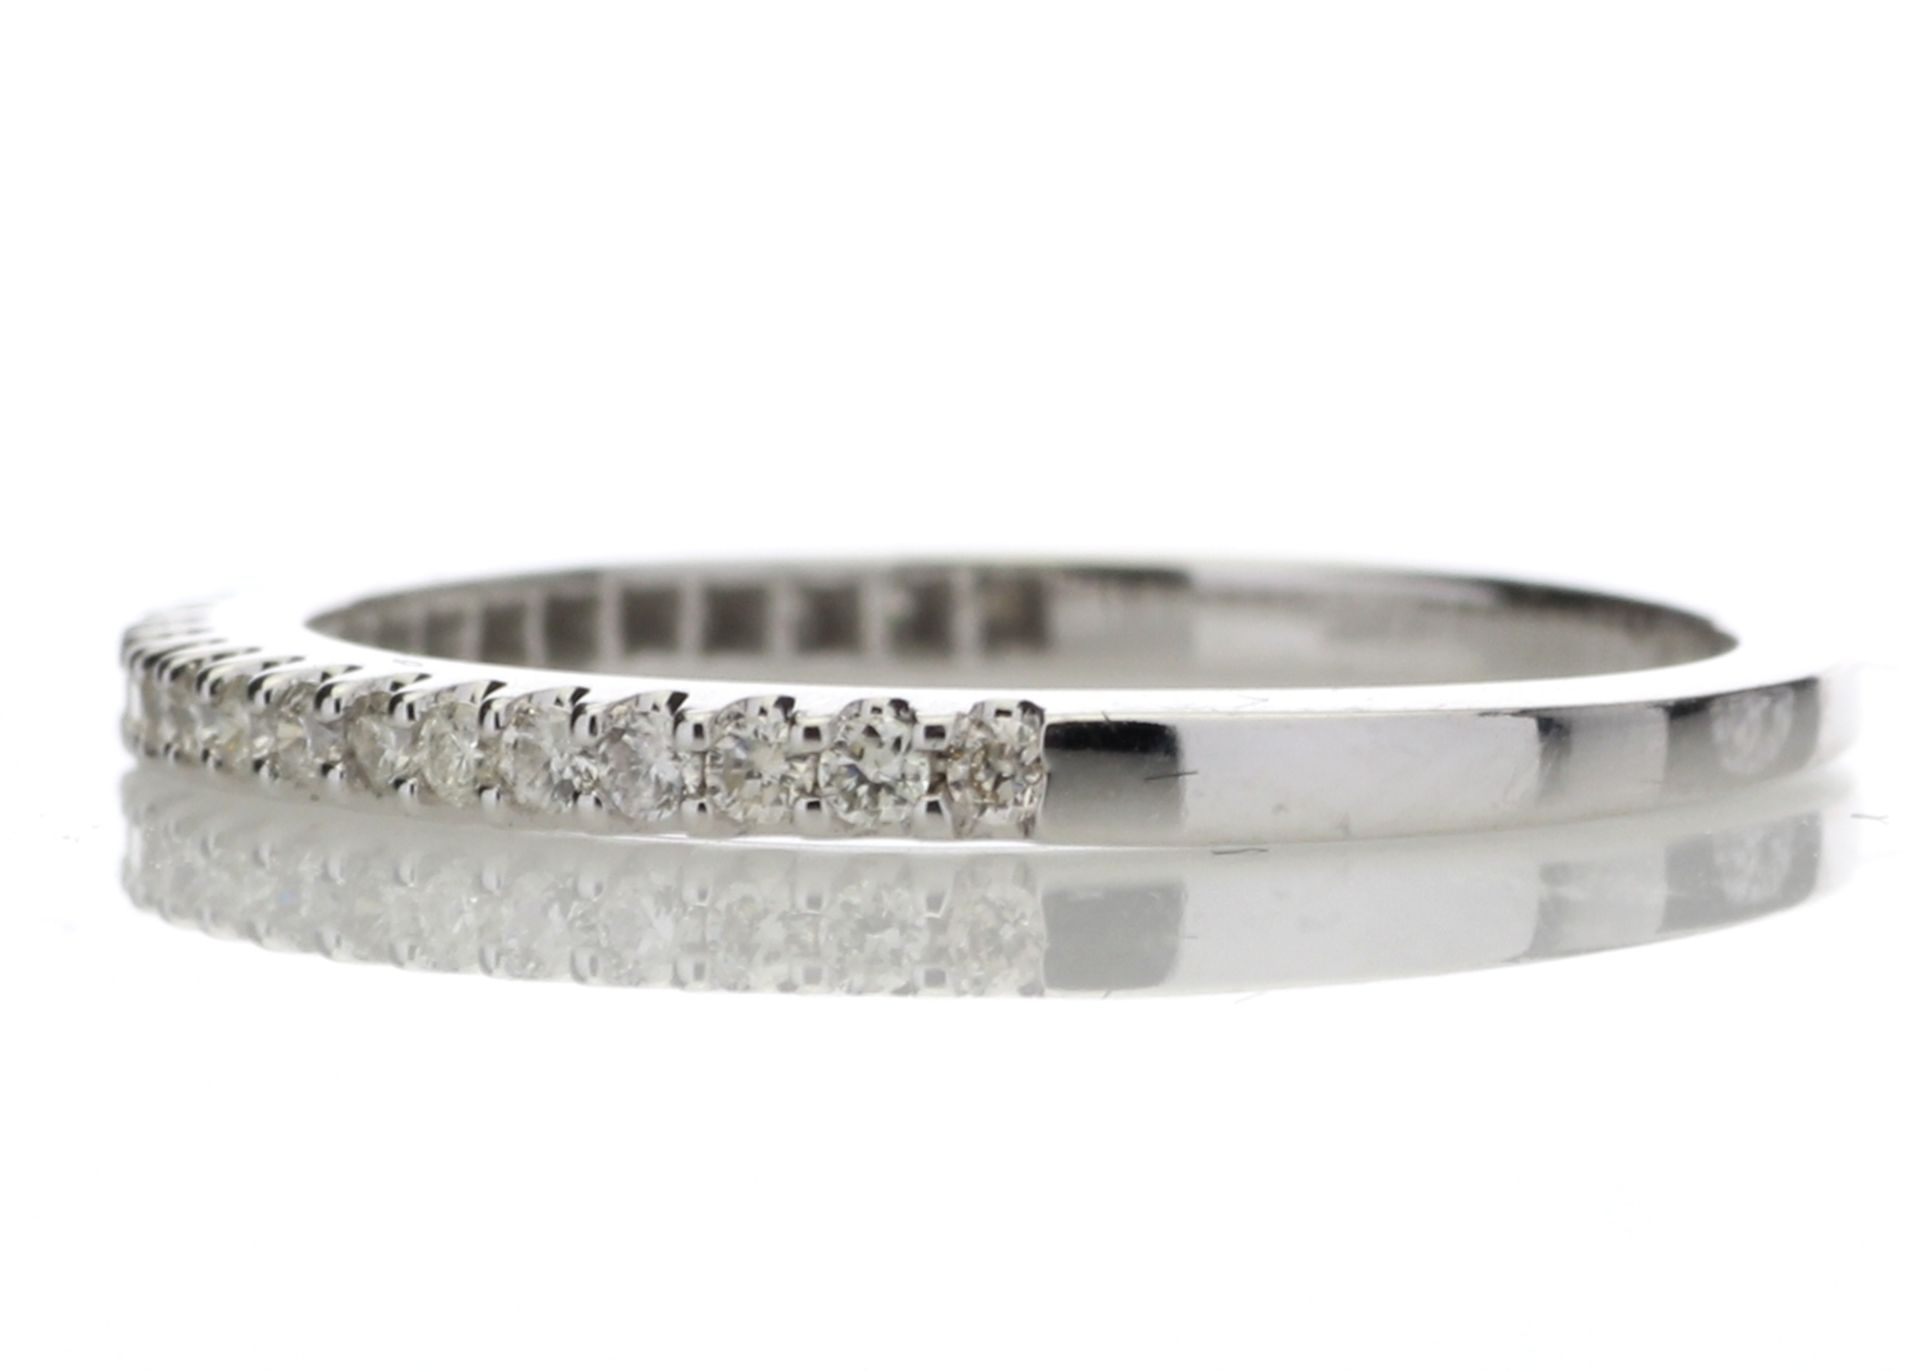 9ct White Gold Diamond Half Eternity Ring 0.25 Carats - Valued by GIE £2,745.00 - 9ct White Gold - Image 3 of 5